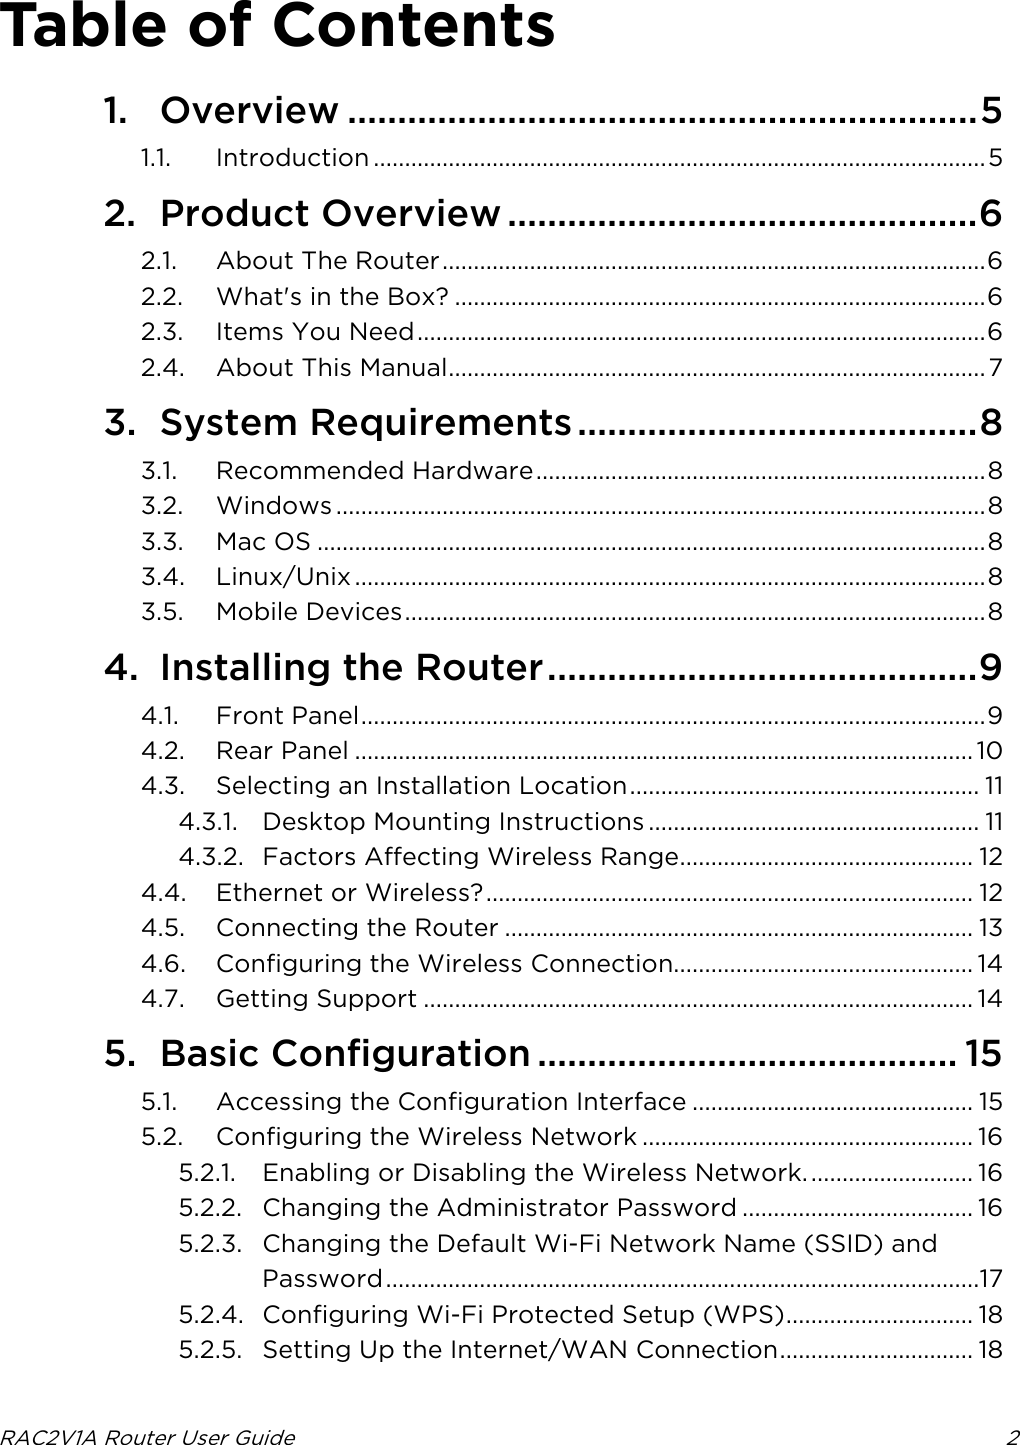 RAC2V1A Router User Guide  2  Table of Contents 1. Overview ............................................................... 5 1.1. Introduction .................................................................................................. 5 2. Product Overview ............................................... 6 2.1. About The Router ....................................................................................... 6 2.2. What&apos;s in the Box? ..................................................................................... 6 2.3. Items You Need ........................................................................................... 6 2.4. About This Manual ...................................................................................... 7 3. System Requirements ........................................ 8 3.1. Recommended Hardware ........................................................................ 8 3.2. Windows ........................................................................................................ 8 3.3. Mac OS ........................................................................................................... 8 3.4. Linux/Unix ..................................................................................................... 8 3.5. Mobile Devices ............................................................................................. 8 4. Installing the Router ........................................... 9 4.1. Front Panel .................................................................................................... 9 4.2. Rear Panel ................................................................................................... 10 4.3. Selecting an Installation Location ........................................................ 11 4.3.1. Desktop Mounting Instructions ..................................................... 11 4.3.2. Factors Affecting Wireless Range............................................... 12 4.4. Ethernet or Wireless? .............................................................................. 12 4.5. Connecting the Router ........................................................................... 13 4.6. Configuring the Wireless Connection................................................ 14 4.7. Getting Support ........................................................................................ 14 5. Basic Configuration .......................................... 15 5.1. Accessing the Configuration Interface ............................................. 15 5.2. Configuring the Wireless Network ..................................................... 16 5.2.1. Enabling or Disabling the Wireless Network. .......................... 16 5.2.2. Changing the Administrator Password ..................................... 16 5.2.3. Changing the Default Wi-Fi Network Name (SSID) and Password ...............................................................................................17 5.2.4. Configuring Wi-Fi Protected Setup (WPS) .............................. 18 5.2.5. Setting Up the Internet/WAN Connection ............................... 18 